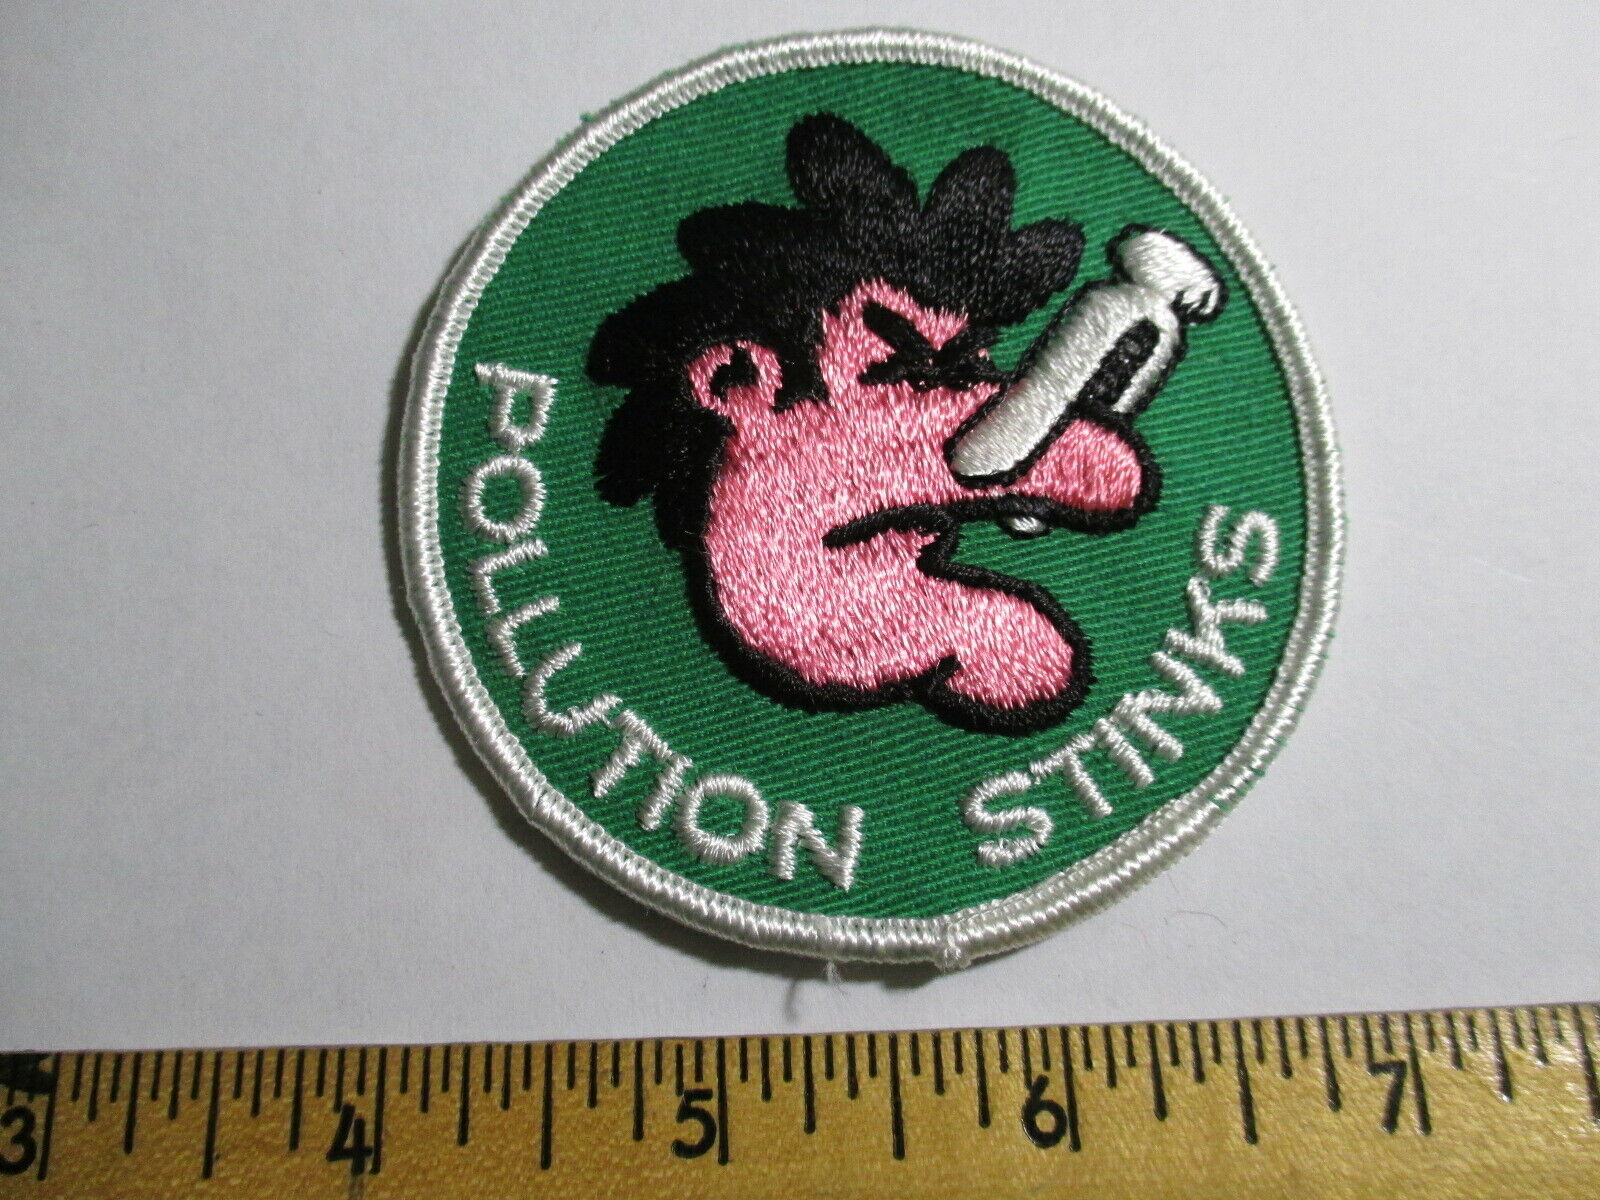 Pollution Stinks Patch Bad-smelling Foul NOS Vintage Environmental Outdoors 